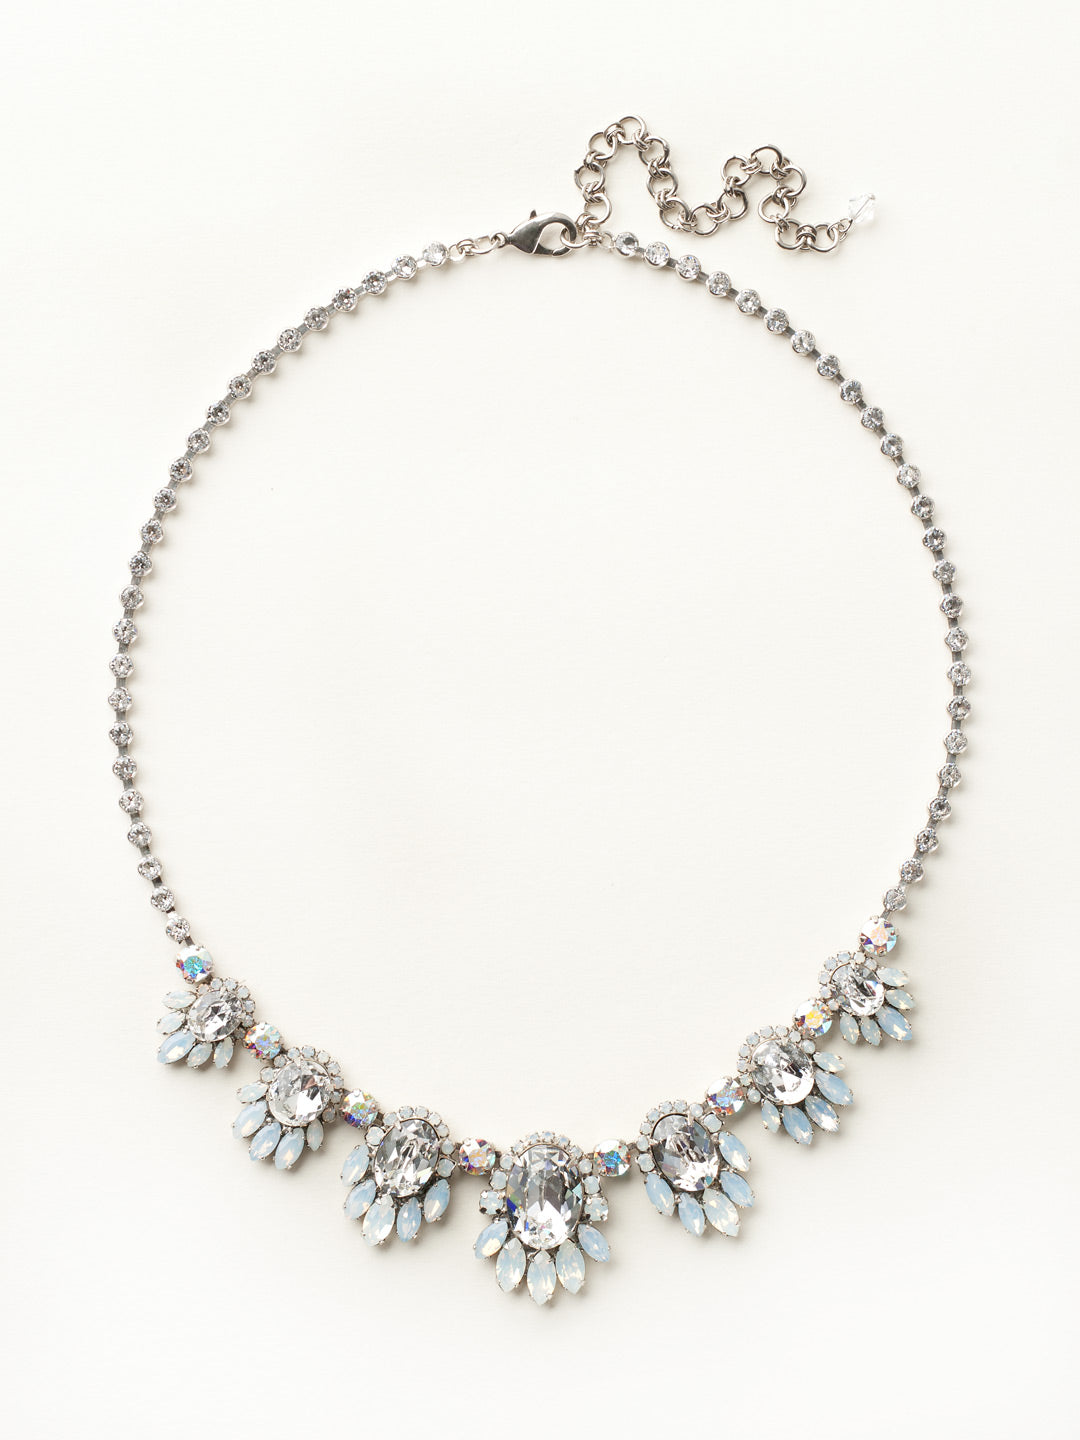 Ornate Multi-Cluster Line Necklace - NCZ4ASWBR - Vintage inspired sparkle! Each crystal cluster features a central oval stone encircled by faceted navette and round crystals.